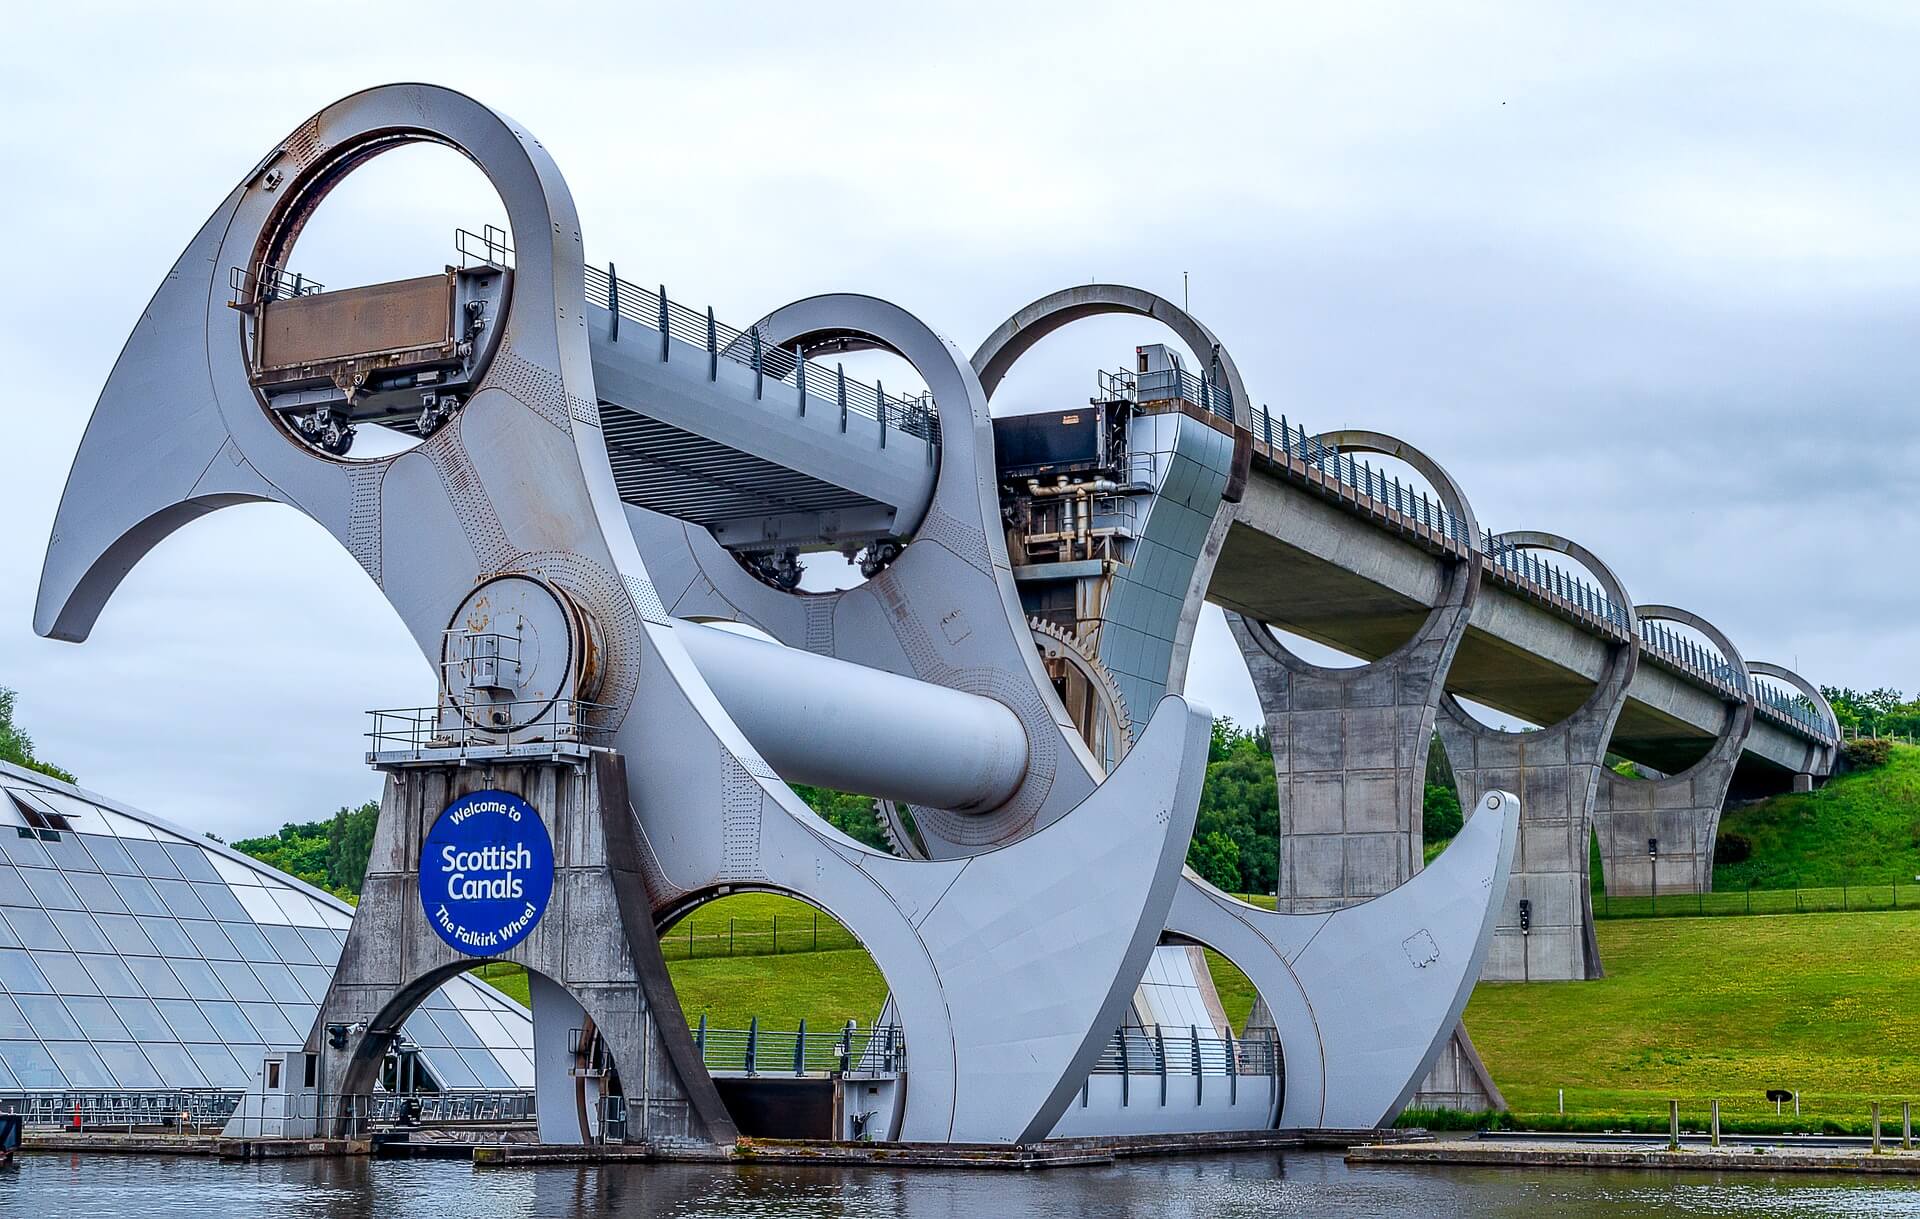 Tuesday's marvels of engineering: The Falkirk Wheel - Worcon